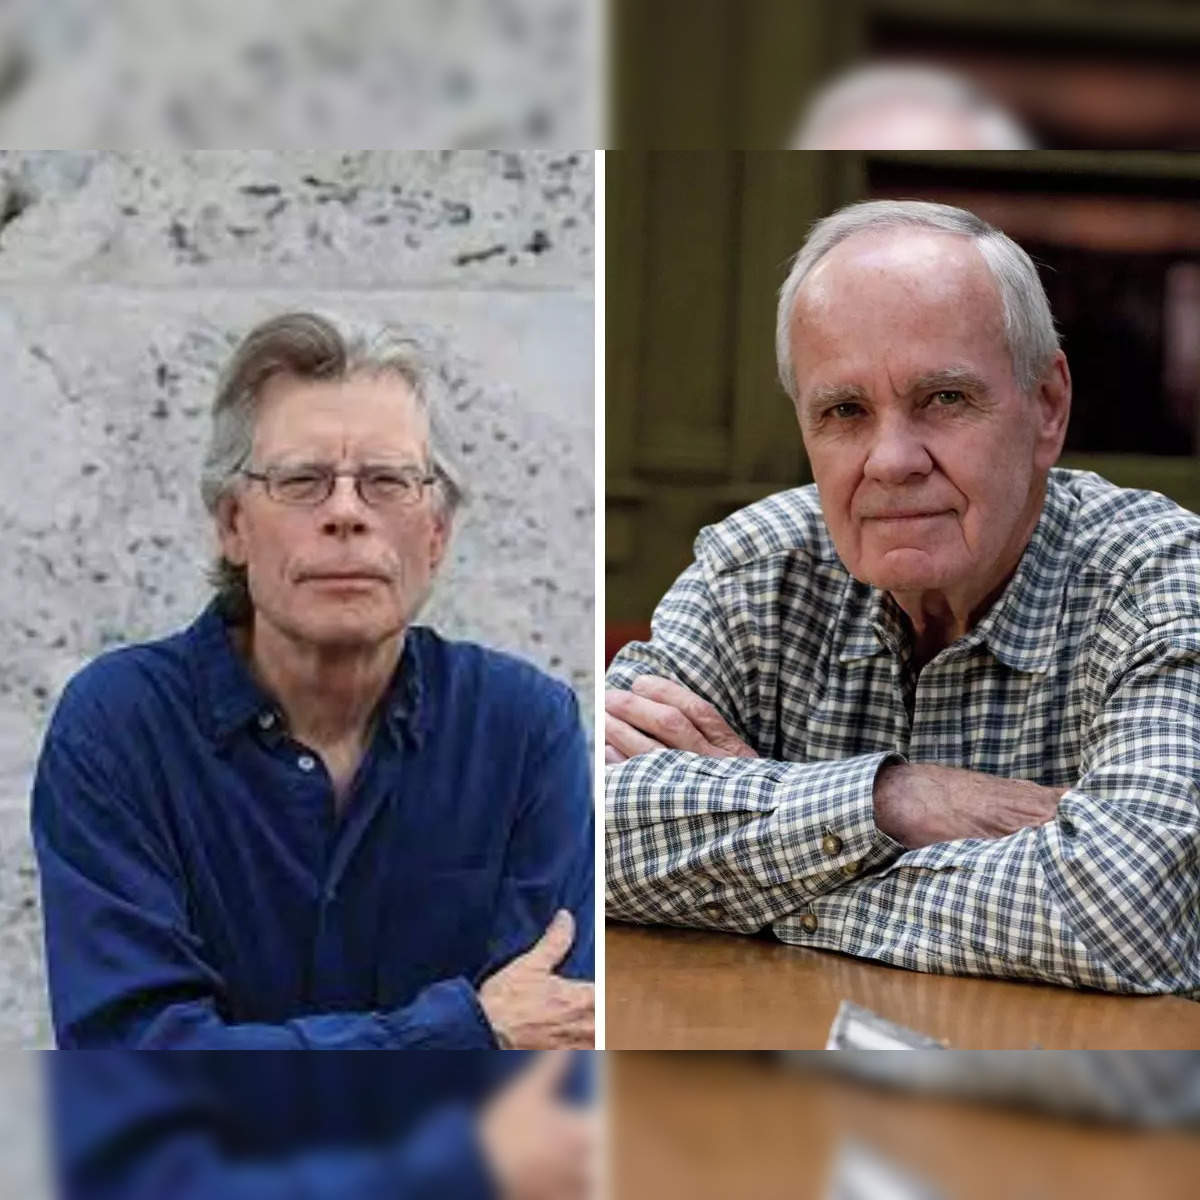 Cormac Mccarthy: Stephen King mourns late author Cormac McCarthy